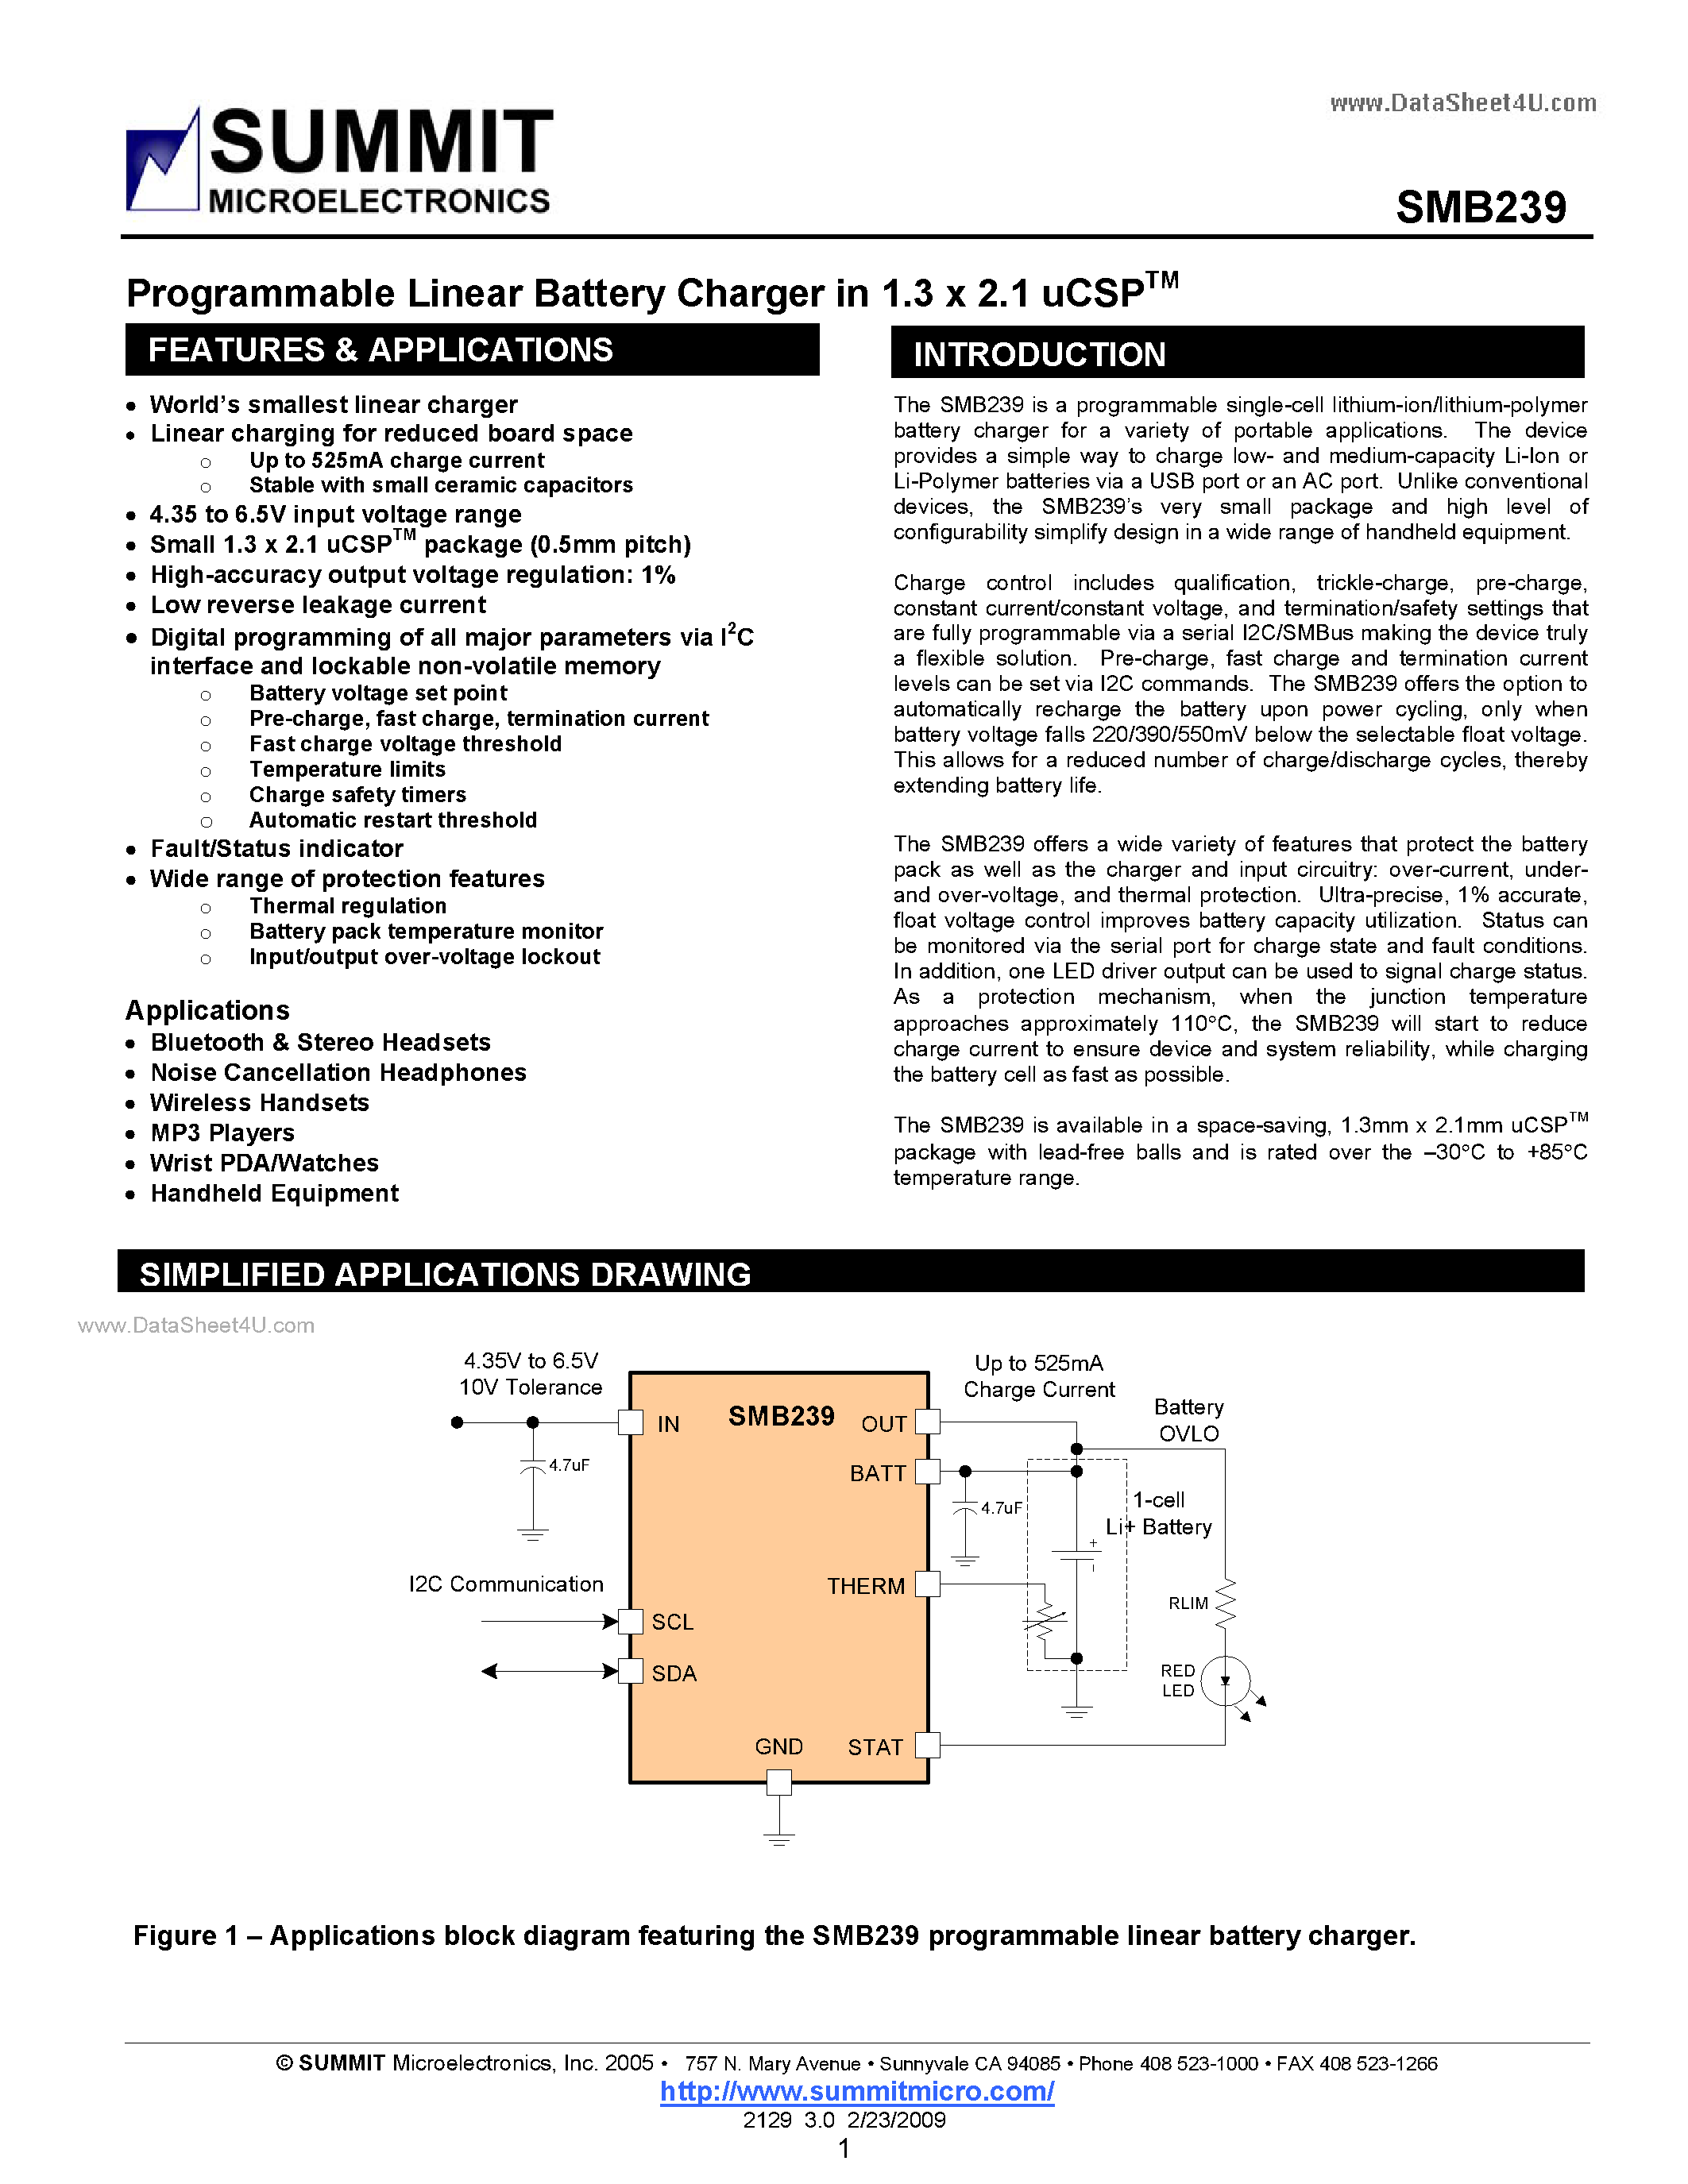 Datasheet SMB239 - Programmable Linear Battery Charger page 1